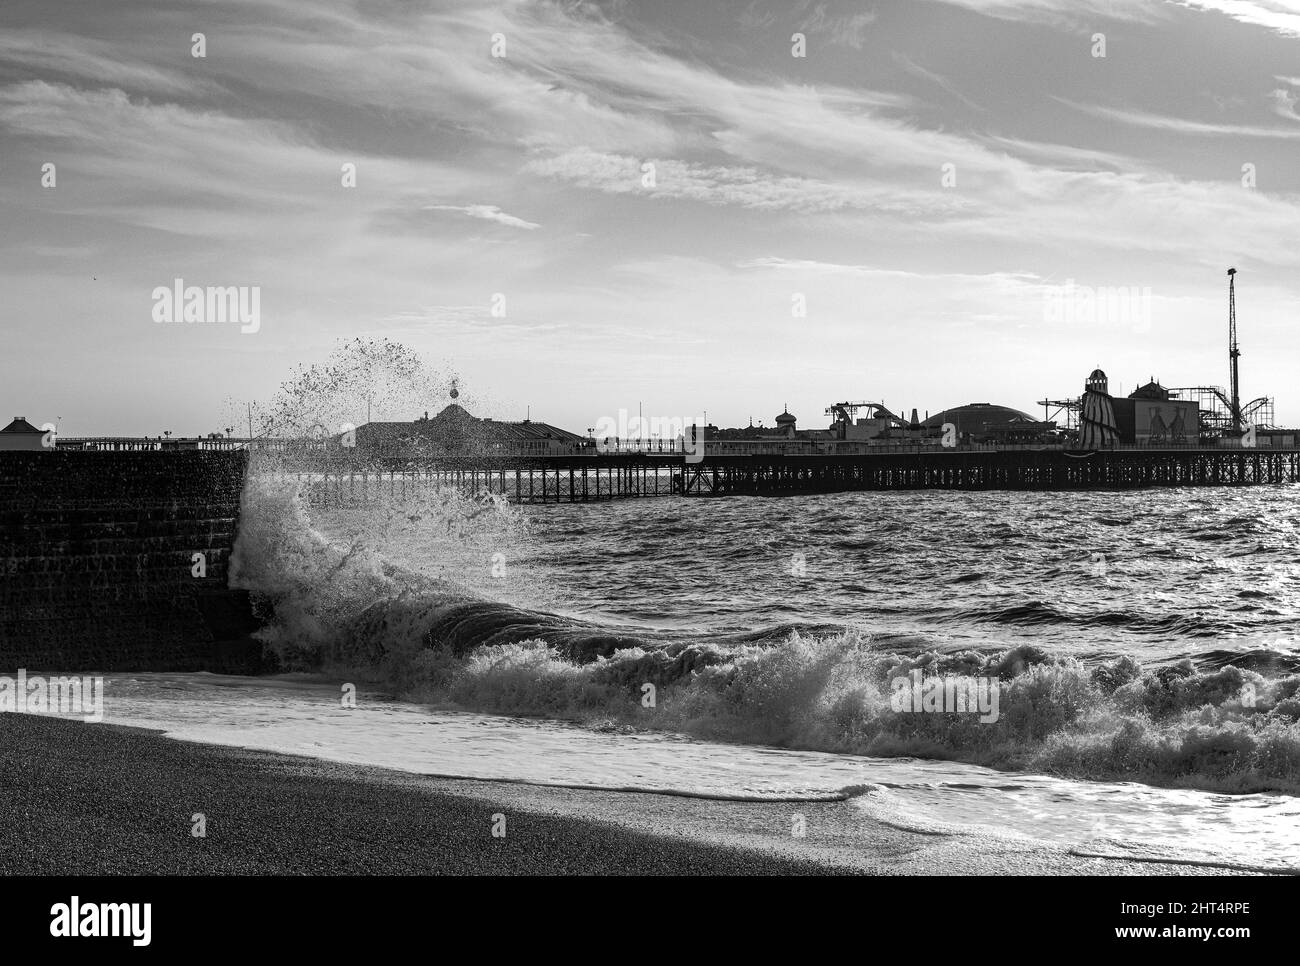 Grayscale shot of the Brighton Palace Pier over the sea on a rainy day in the UK Stock Photo